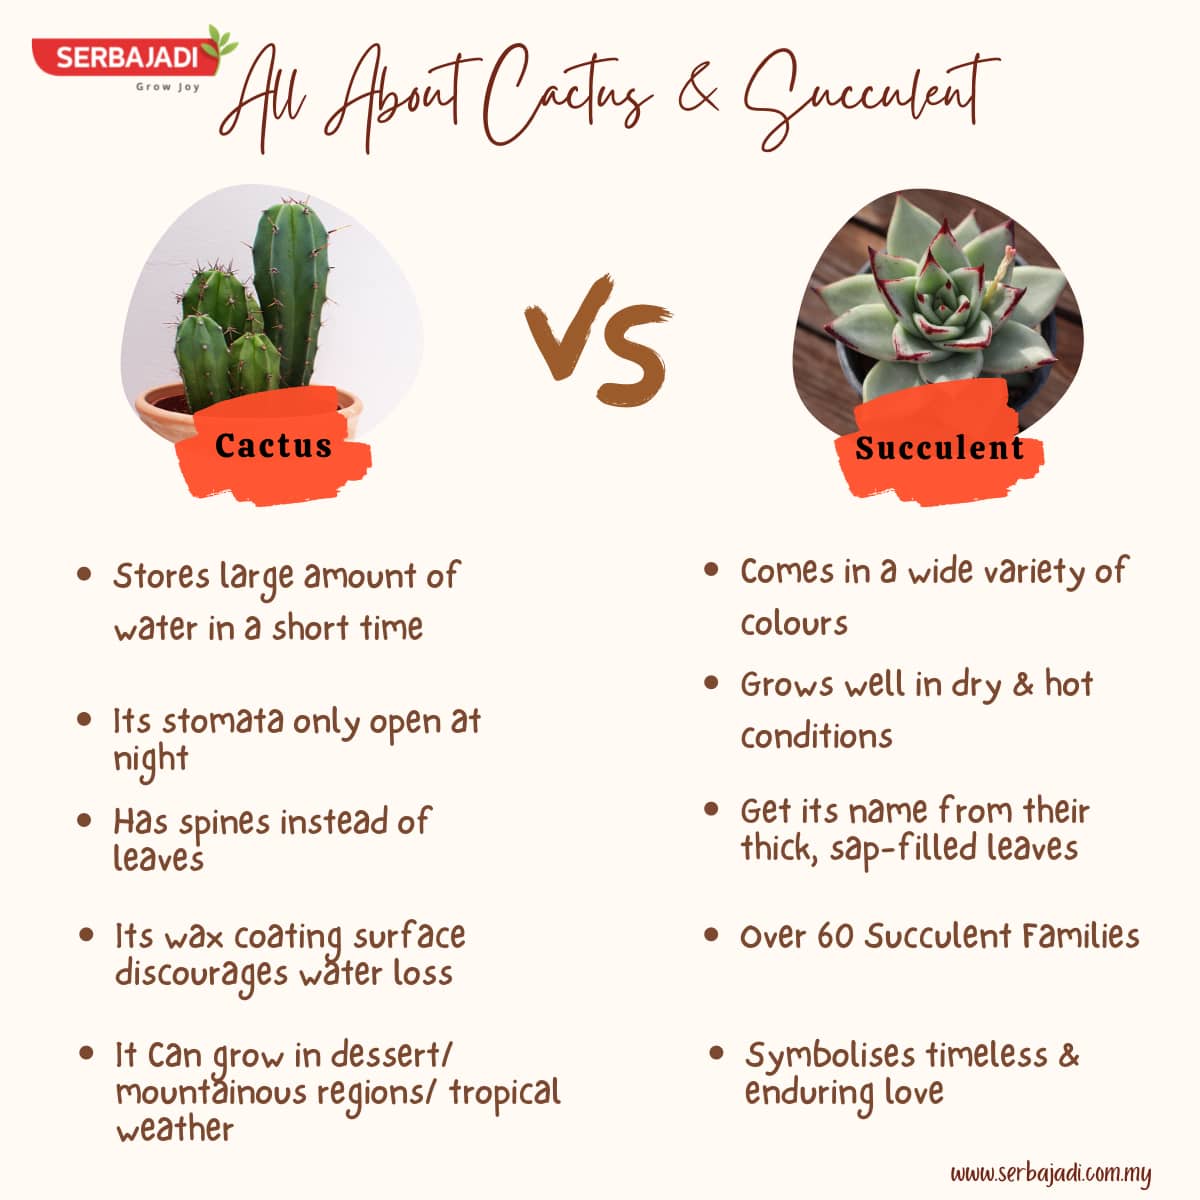 Differences Between Cactus & Succulent